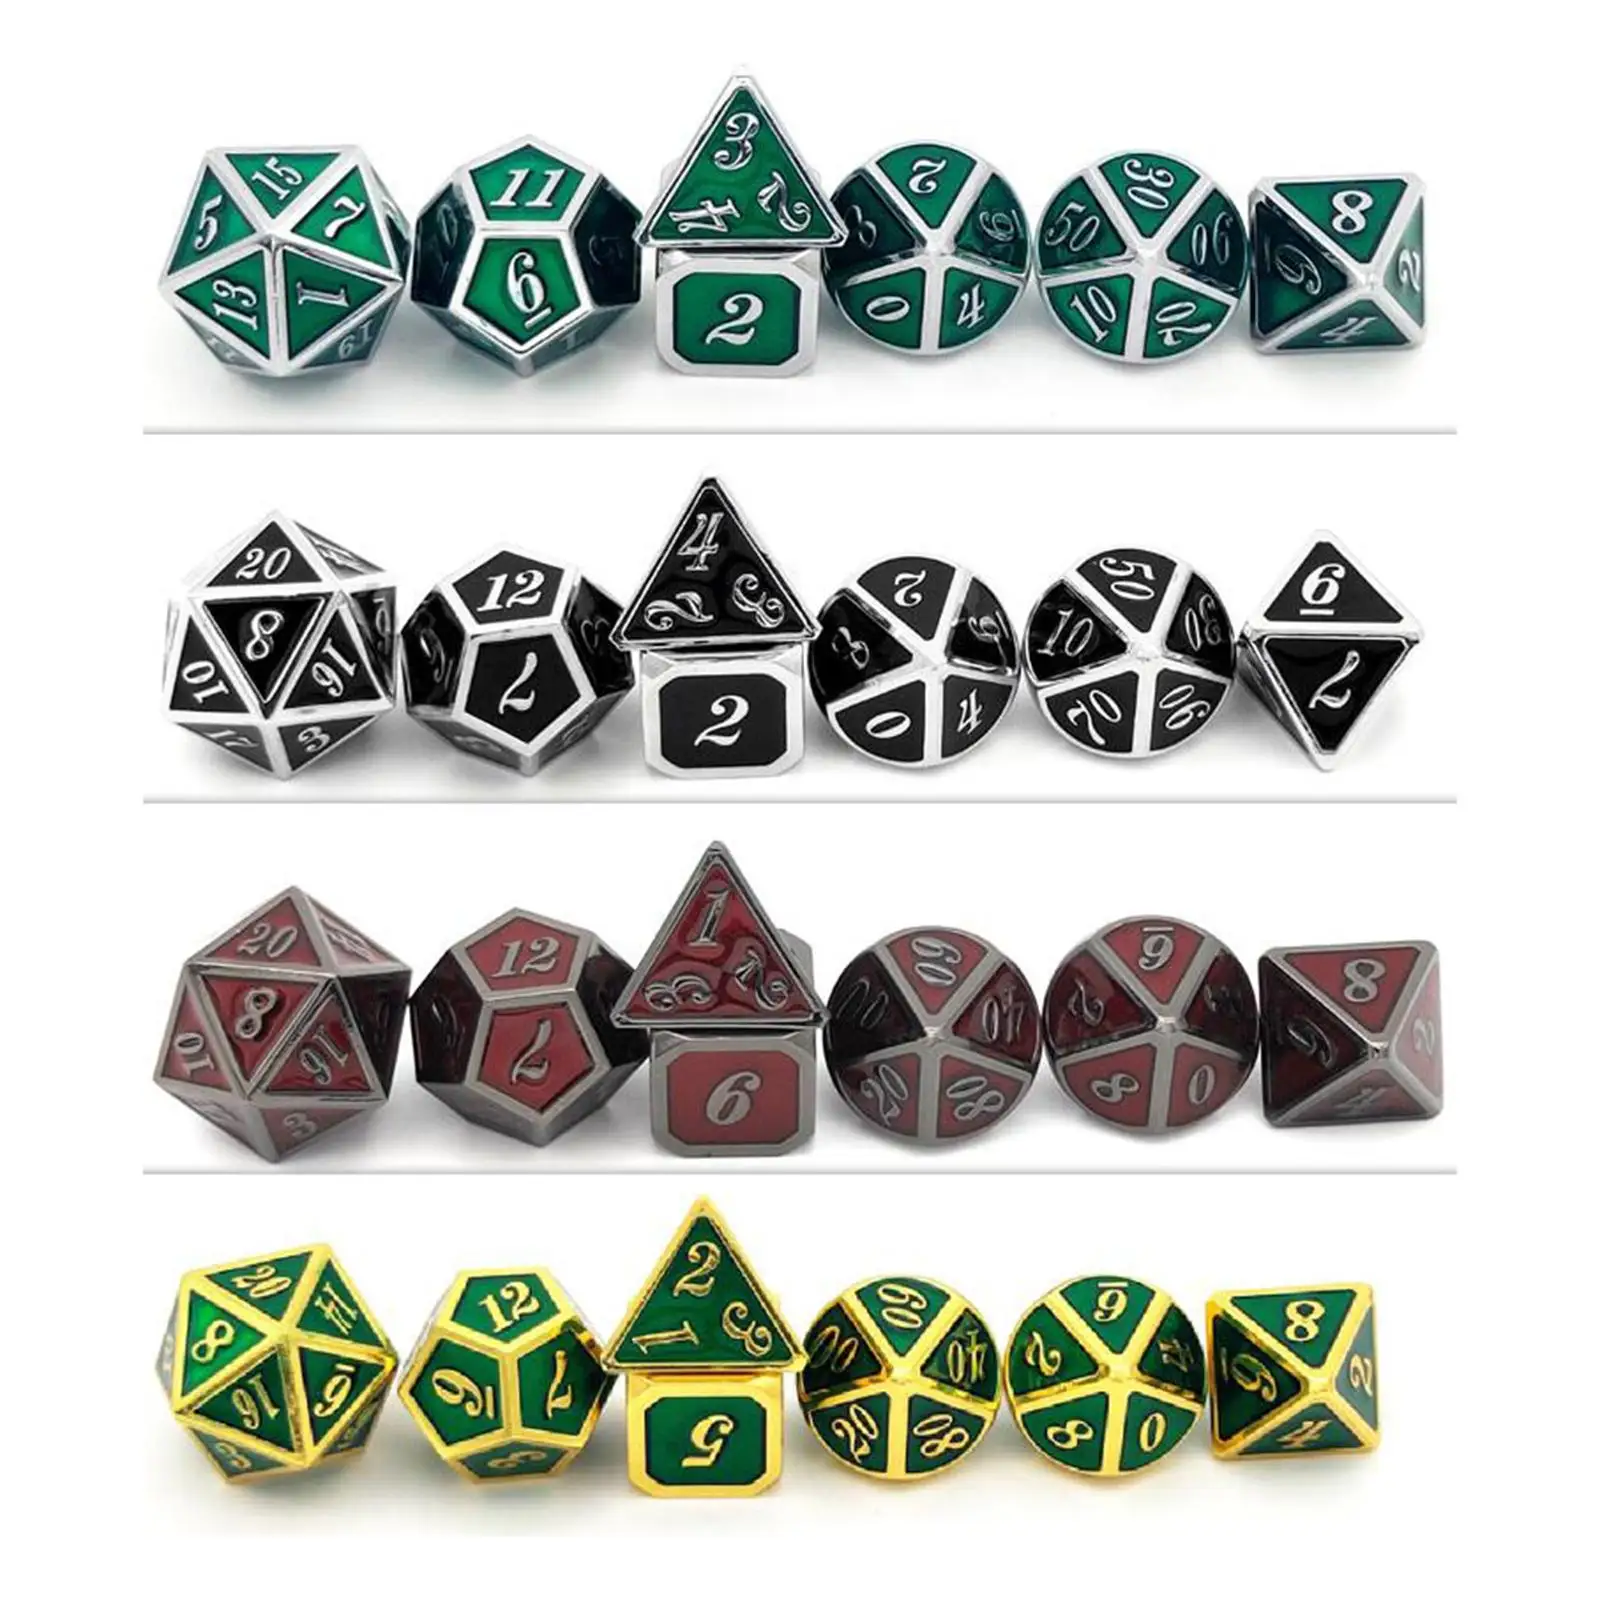 Metal Polyhedral Dice 7Pcs Set Handmade Versatile Reusable Smooth Surface Aluminum Alloy Accessory for Interactive Games 